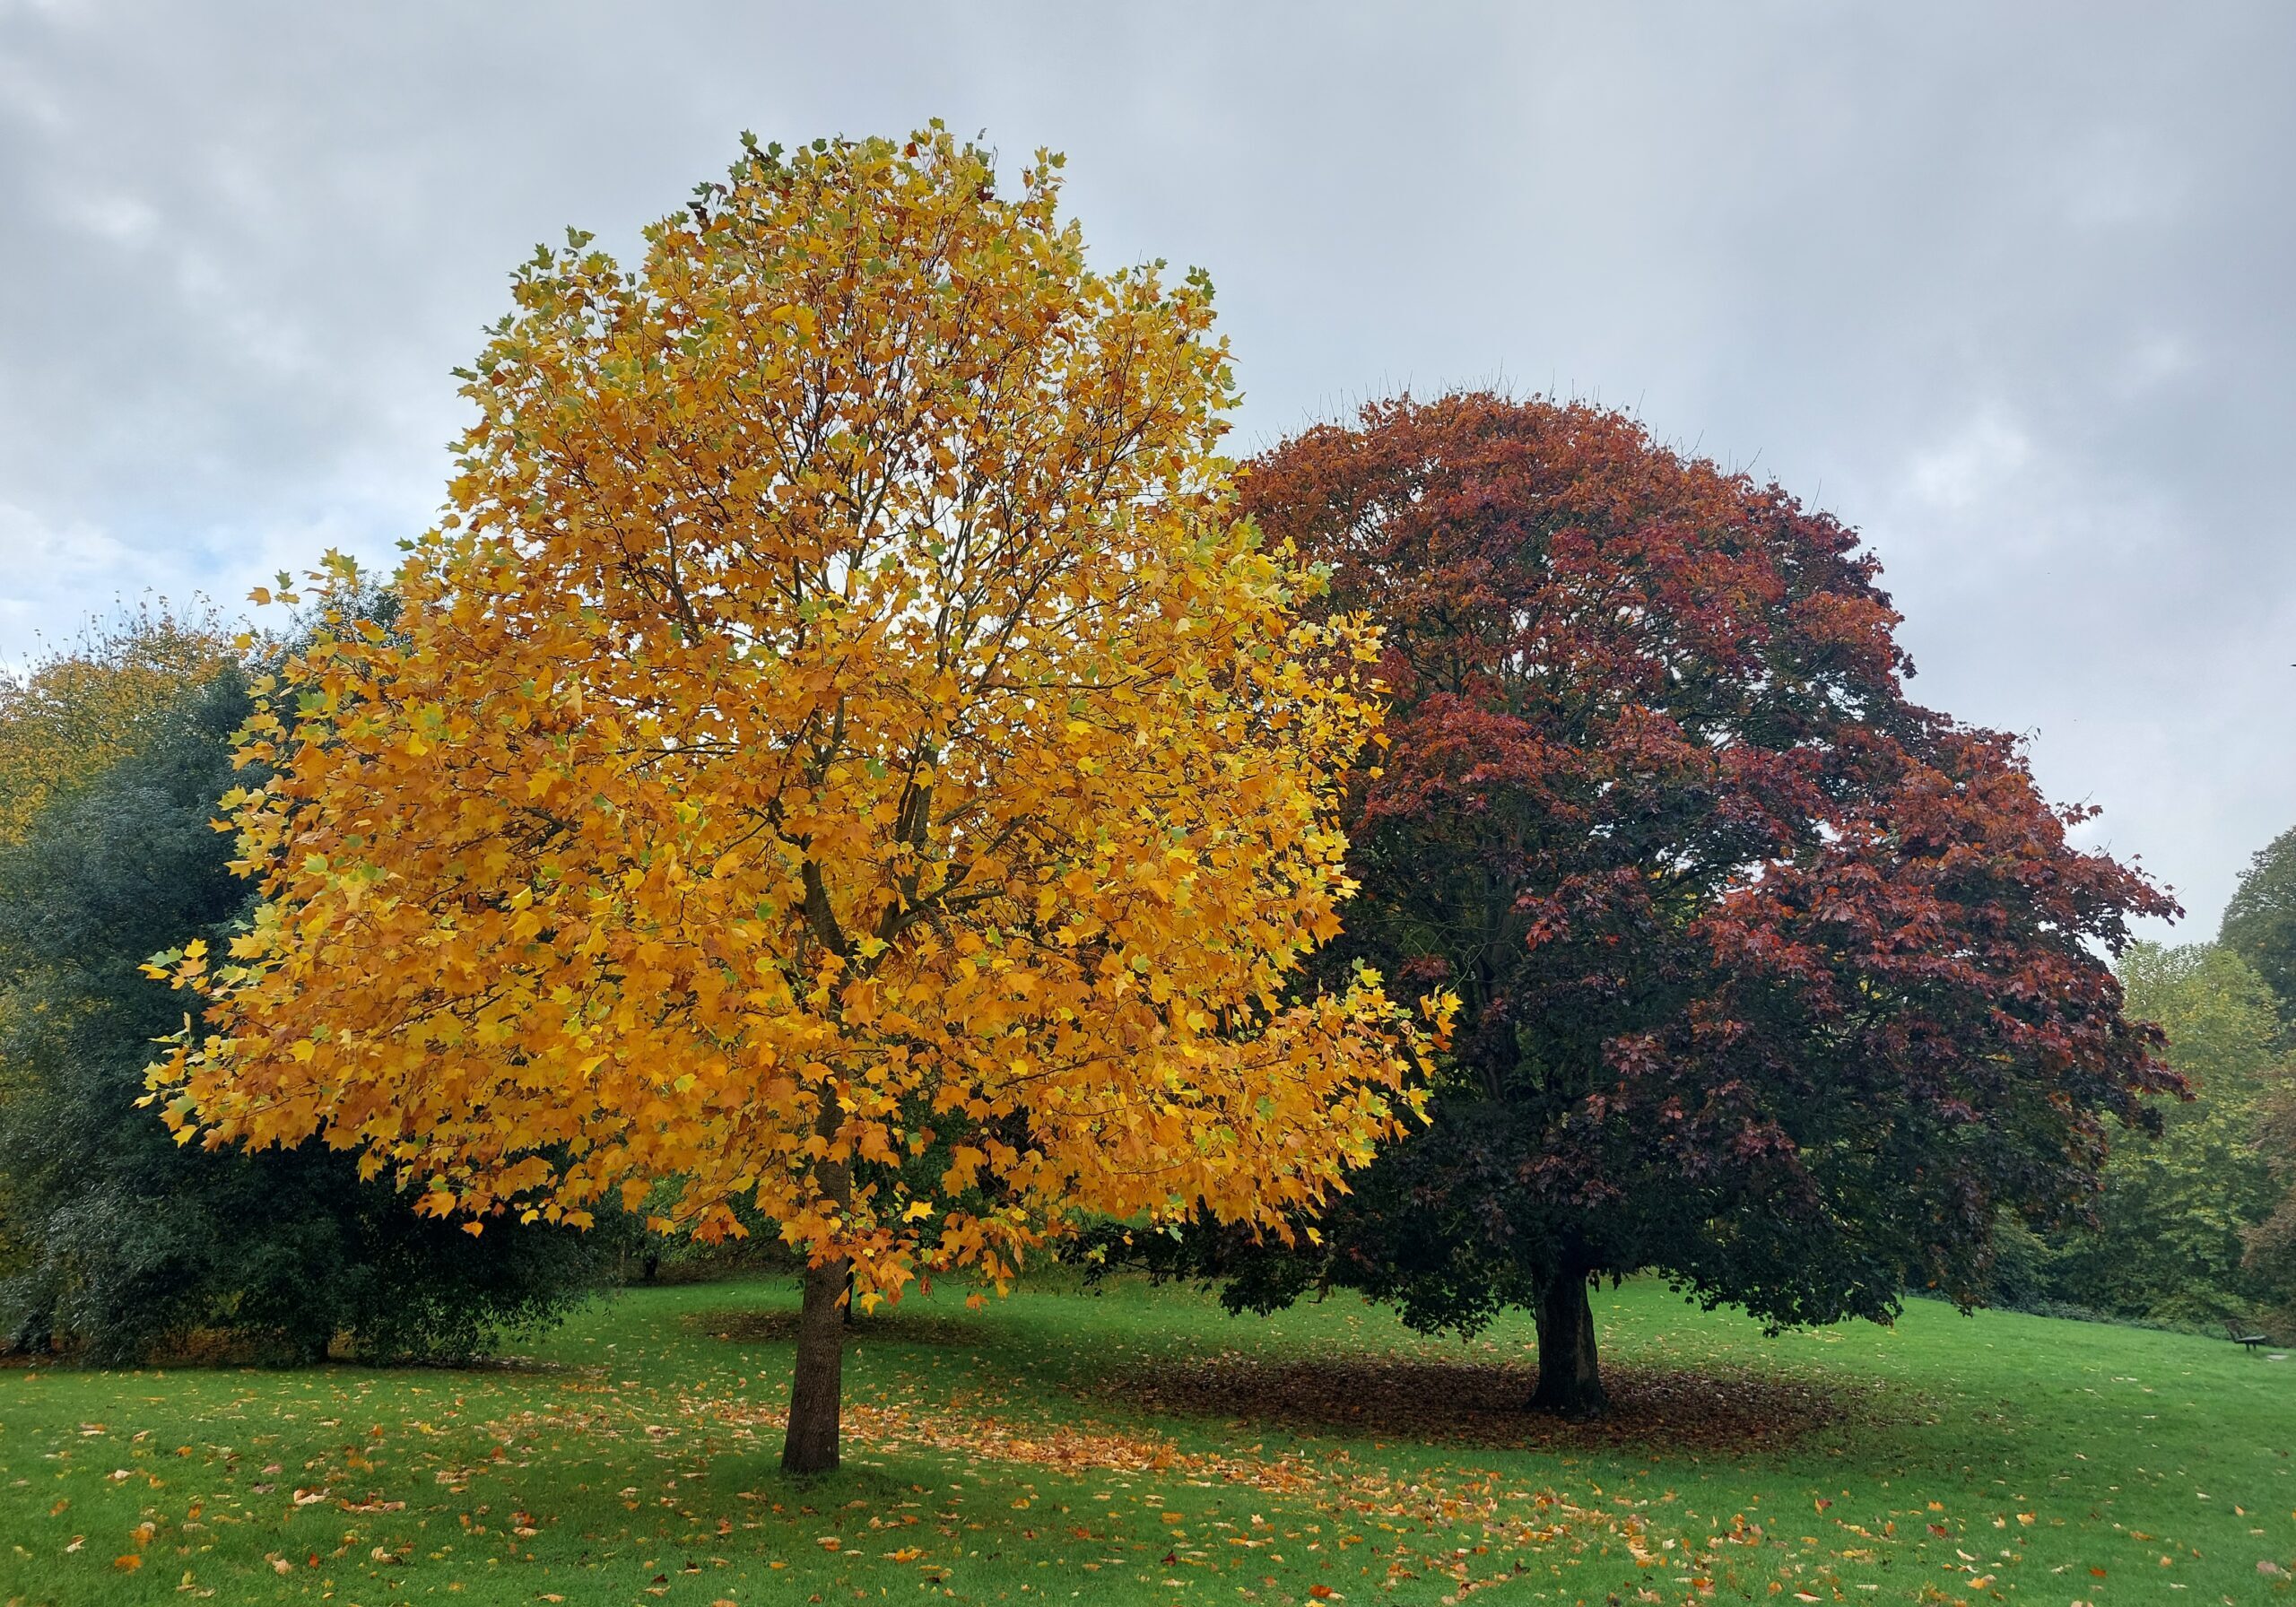 Yellow autumnal tree in front of purple beech